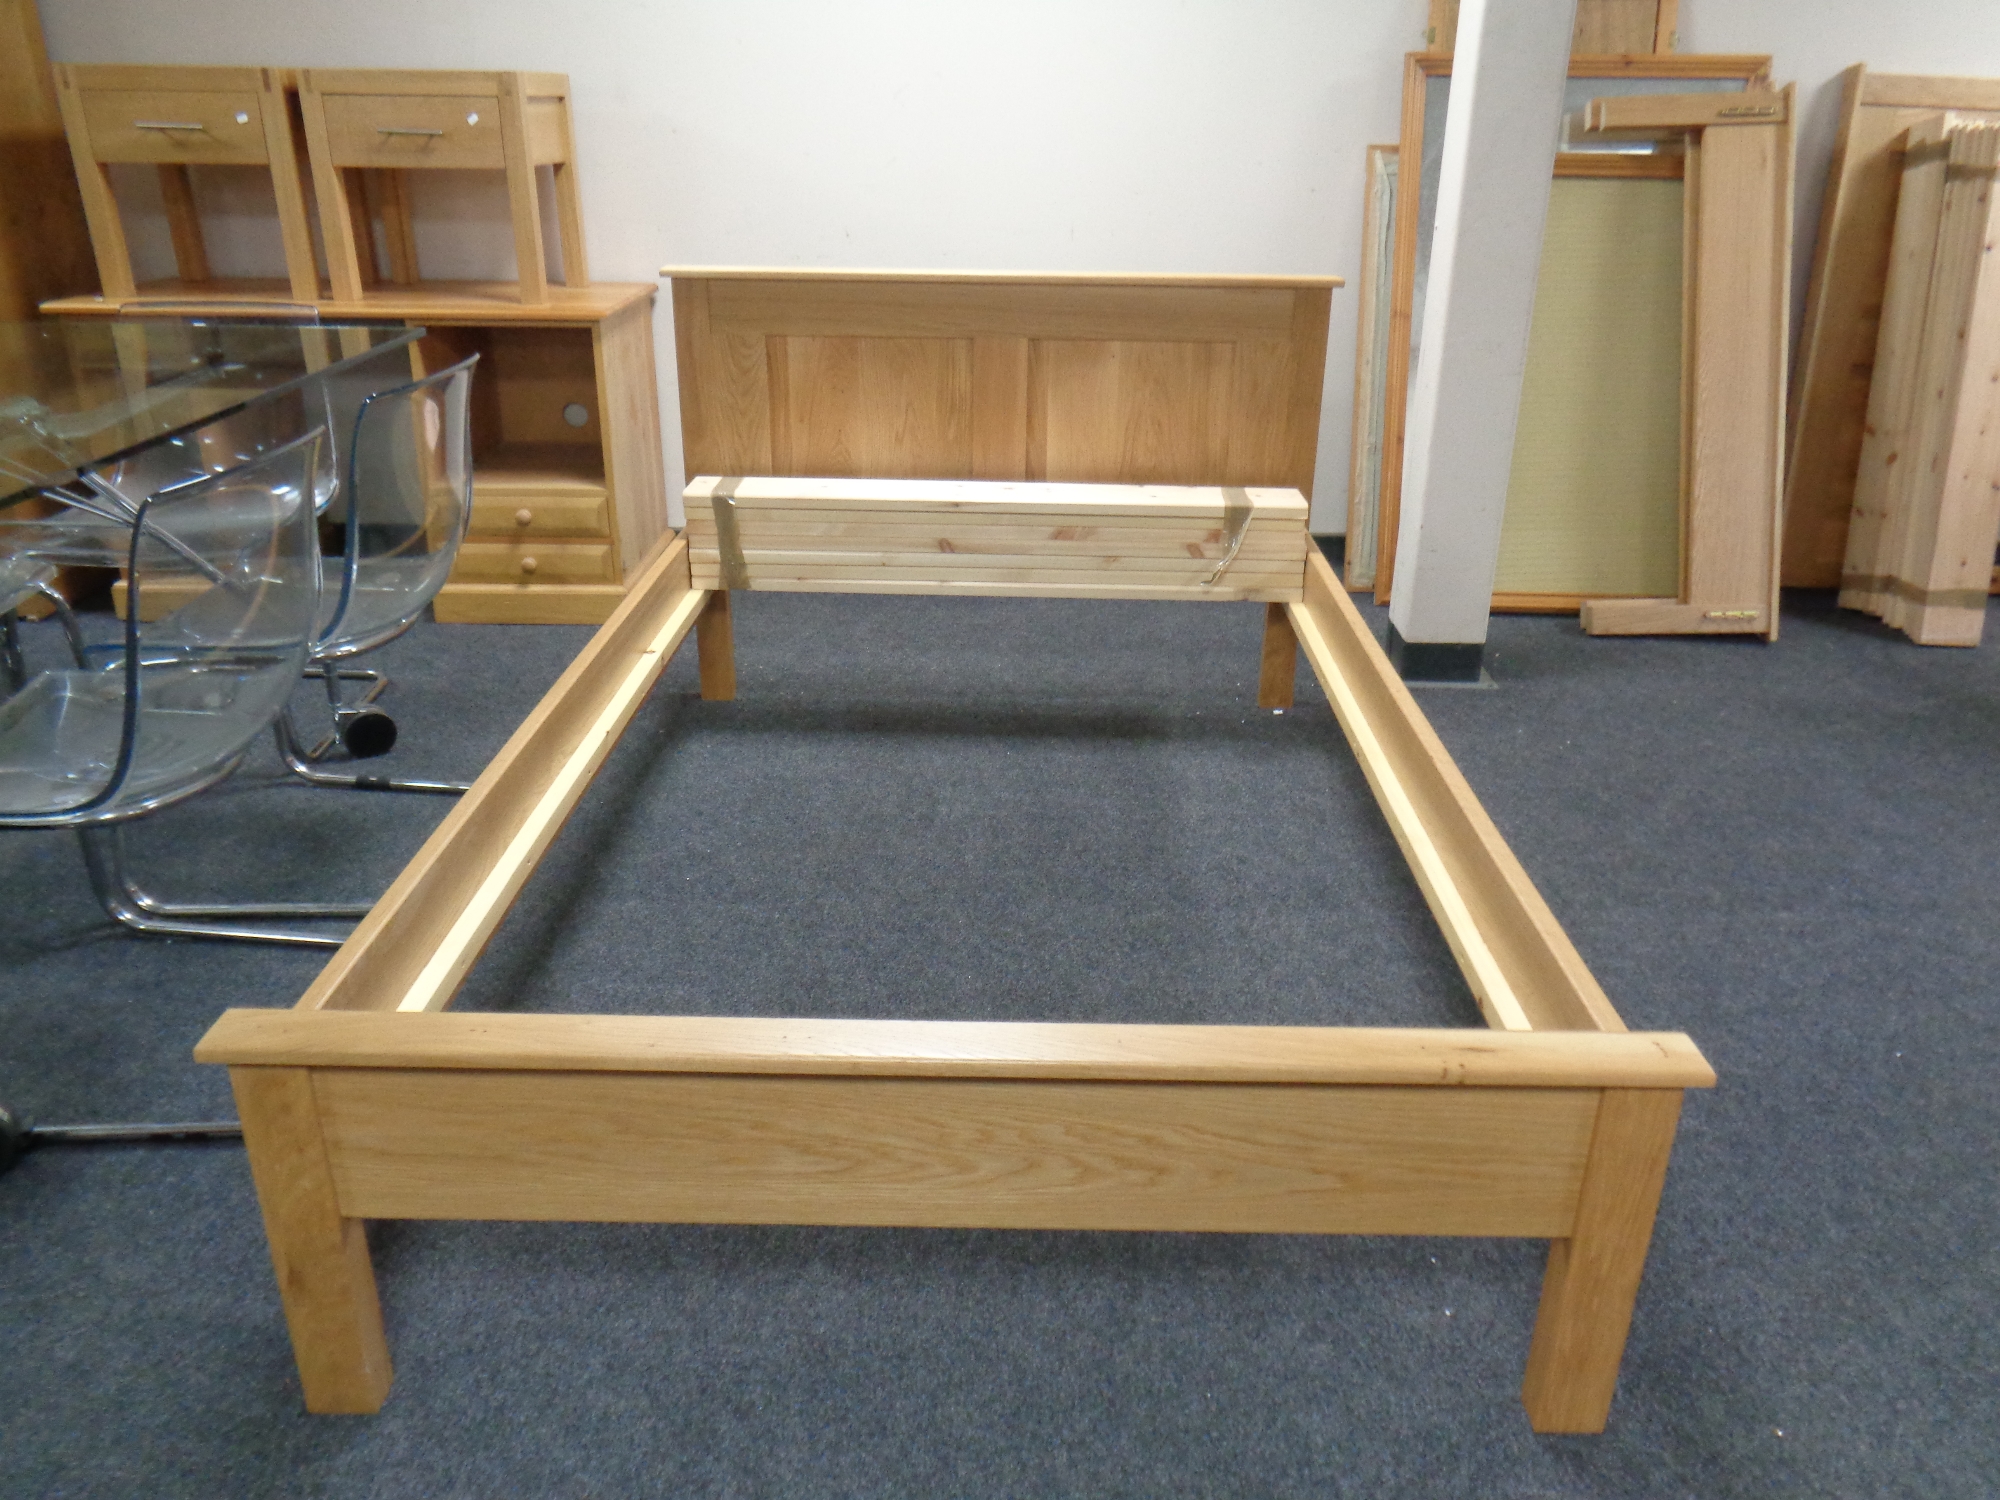 A contemporary oak 4 ft bed frame with mattress slats